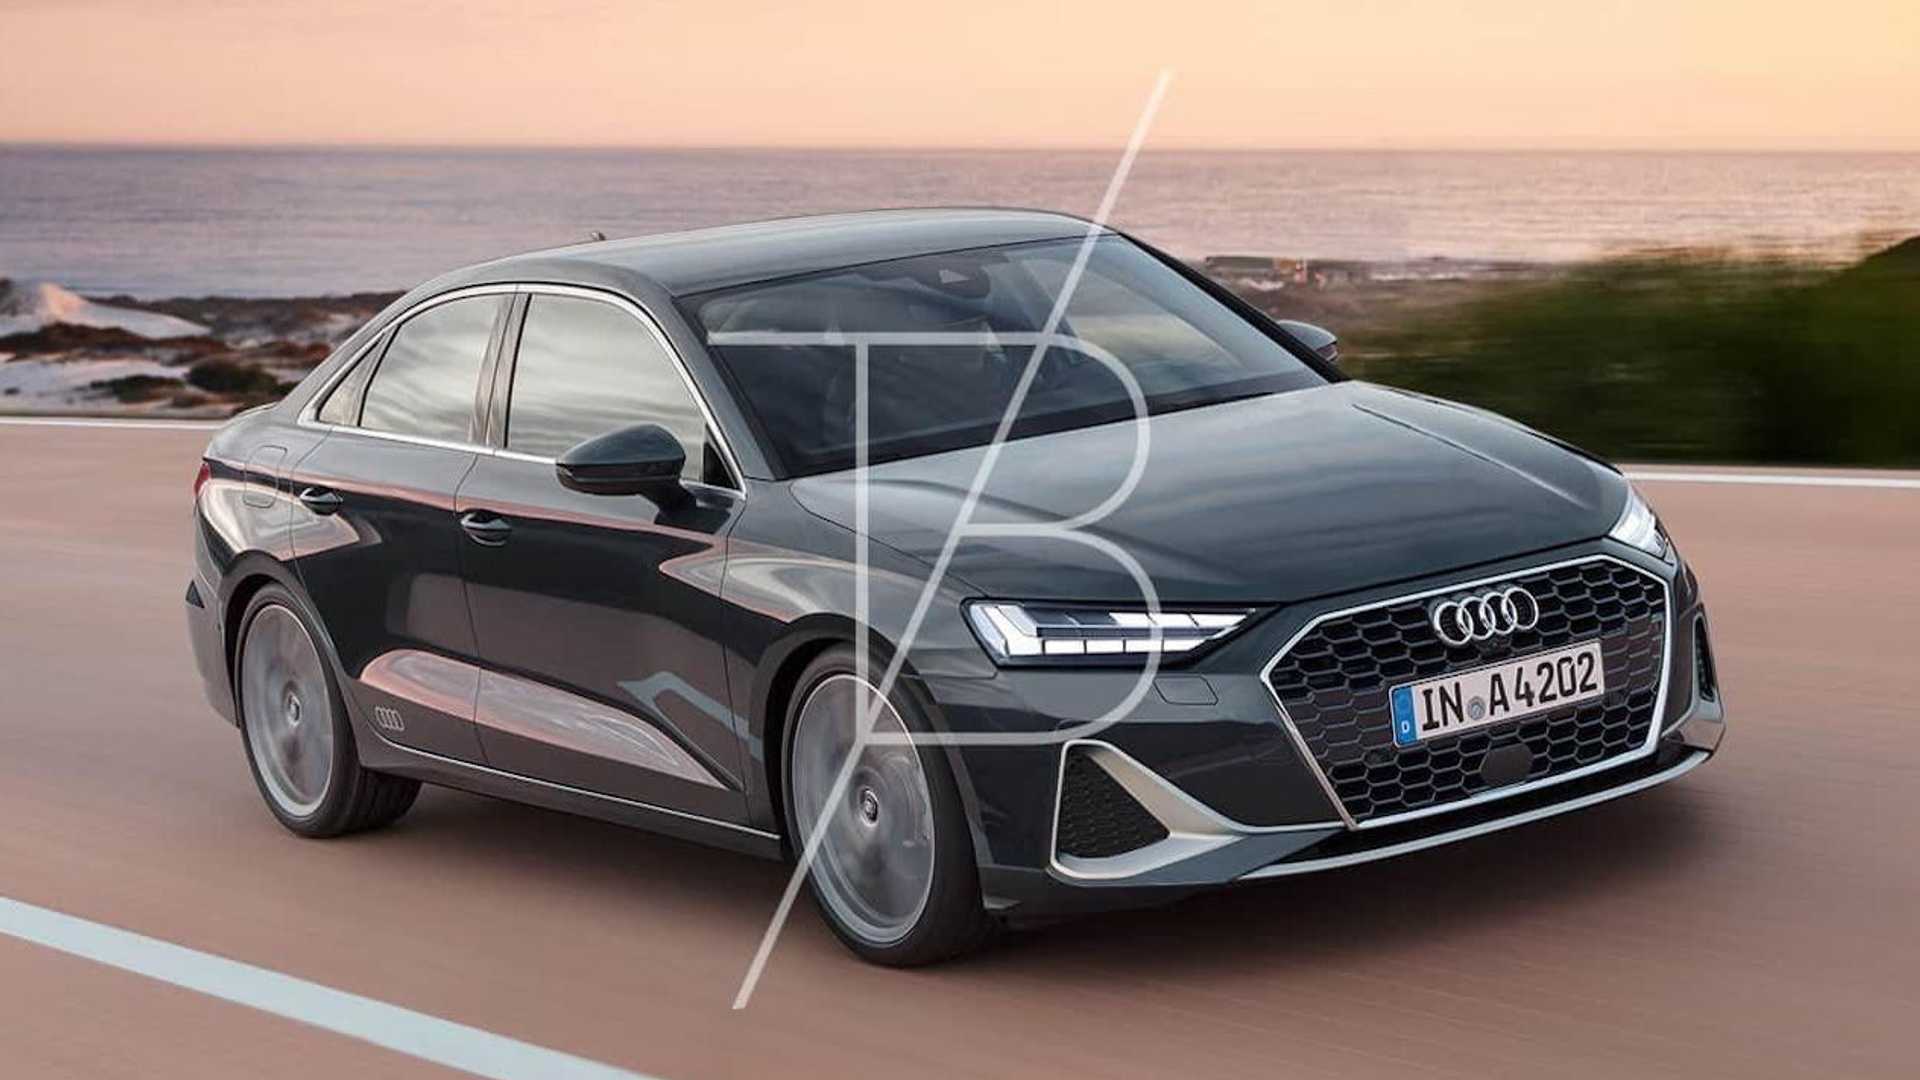 2022 Audi A4 Renderings Preview An ...